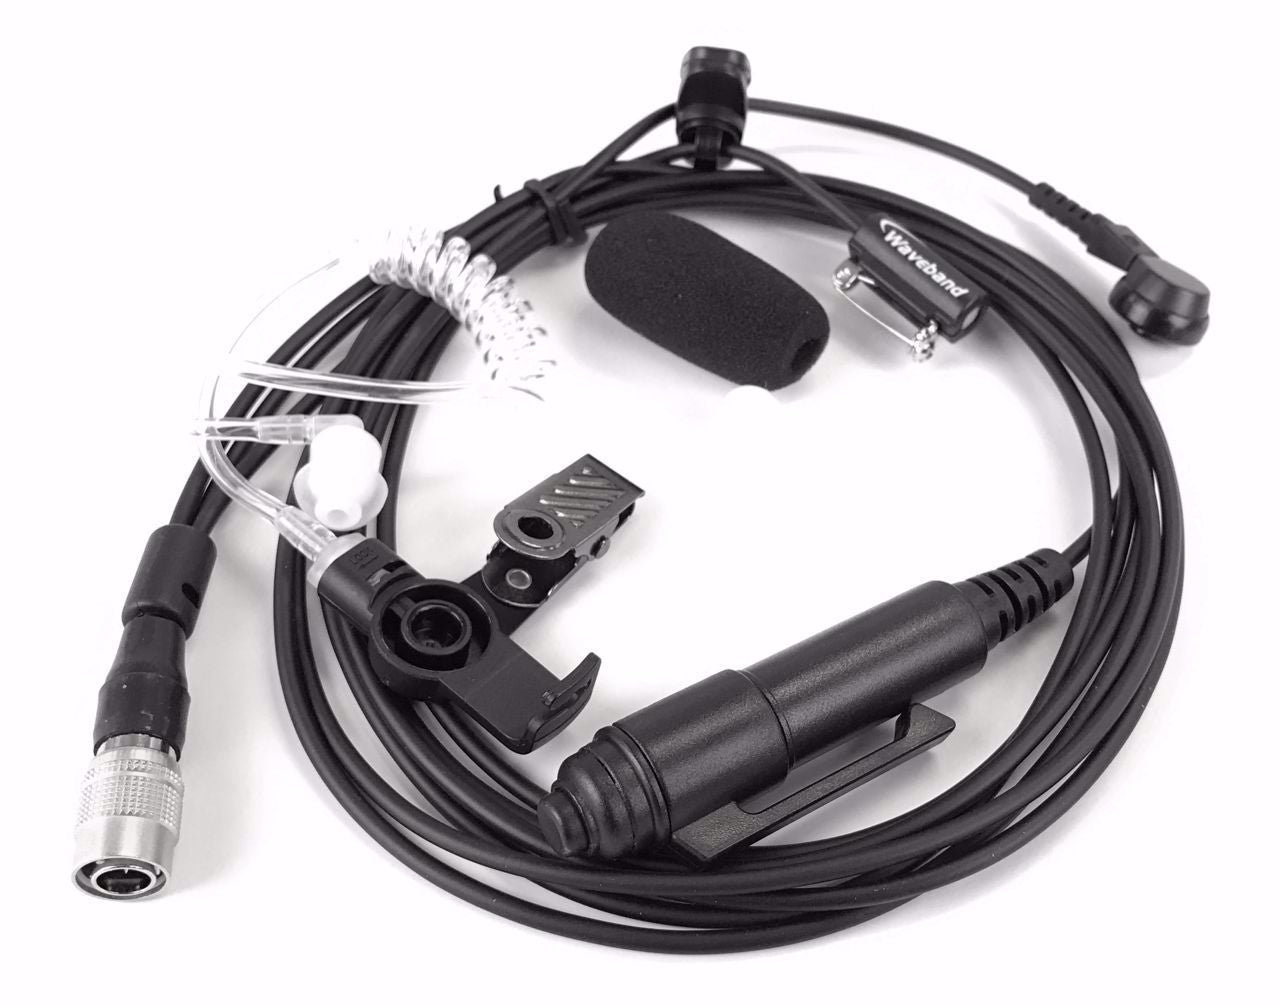 Three wire surveillance kit with Kevlar reinforced cable, premium Knowles microphone, Quick Disconnect clear acoustic and conical pins for P7300, P5500, P5400,P5300, and XG-75 Portables. WB# WV-15040-E4-3wire - First Source Wireless